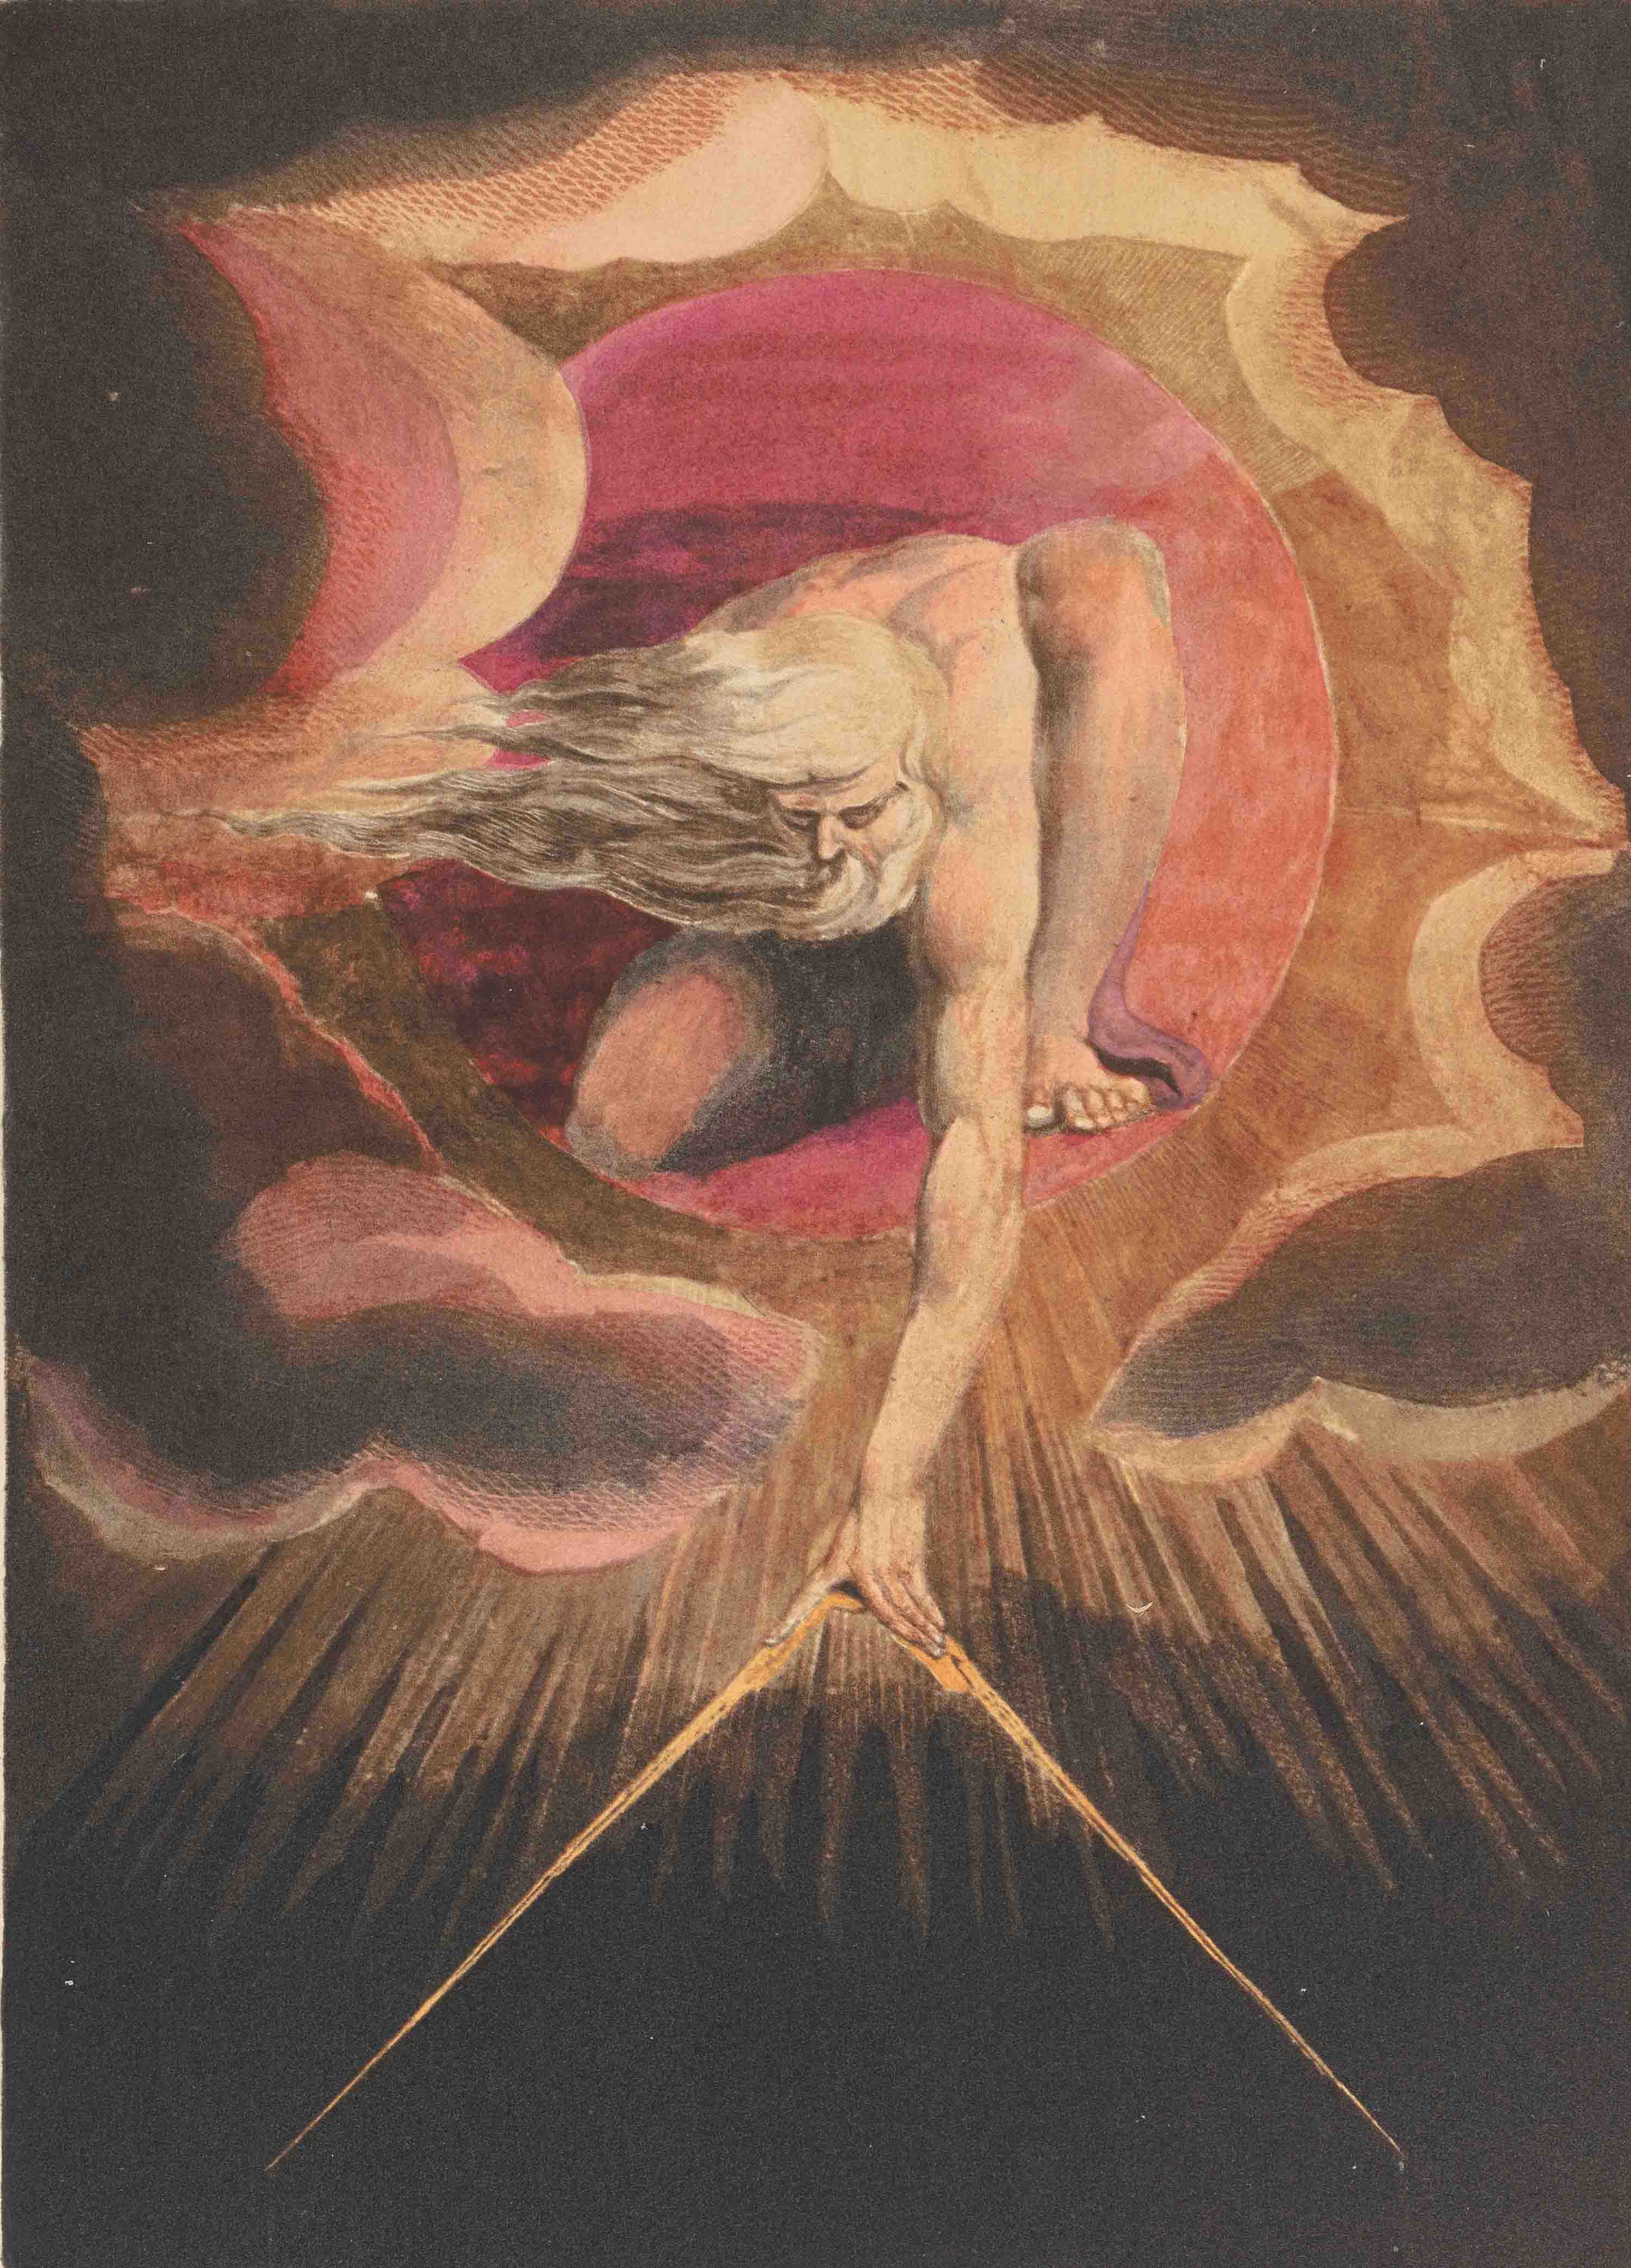 Frontispiece to William Blake's illuminated book, Europe: A Prophecy (1794), reproduced from the 1969 facsimile edition printed by the Trianon Press for the William Blake Trust.